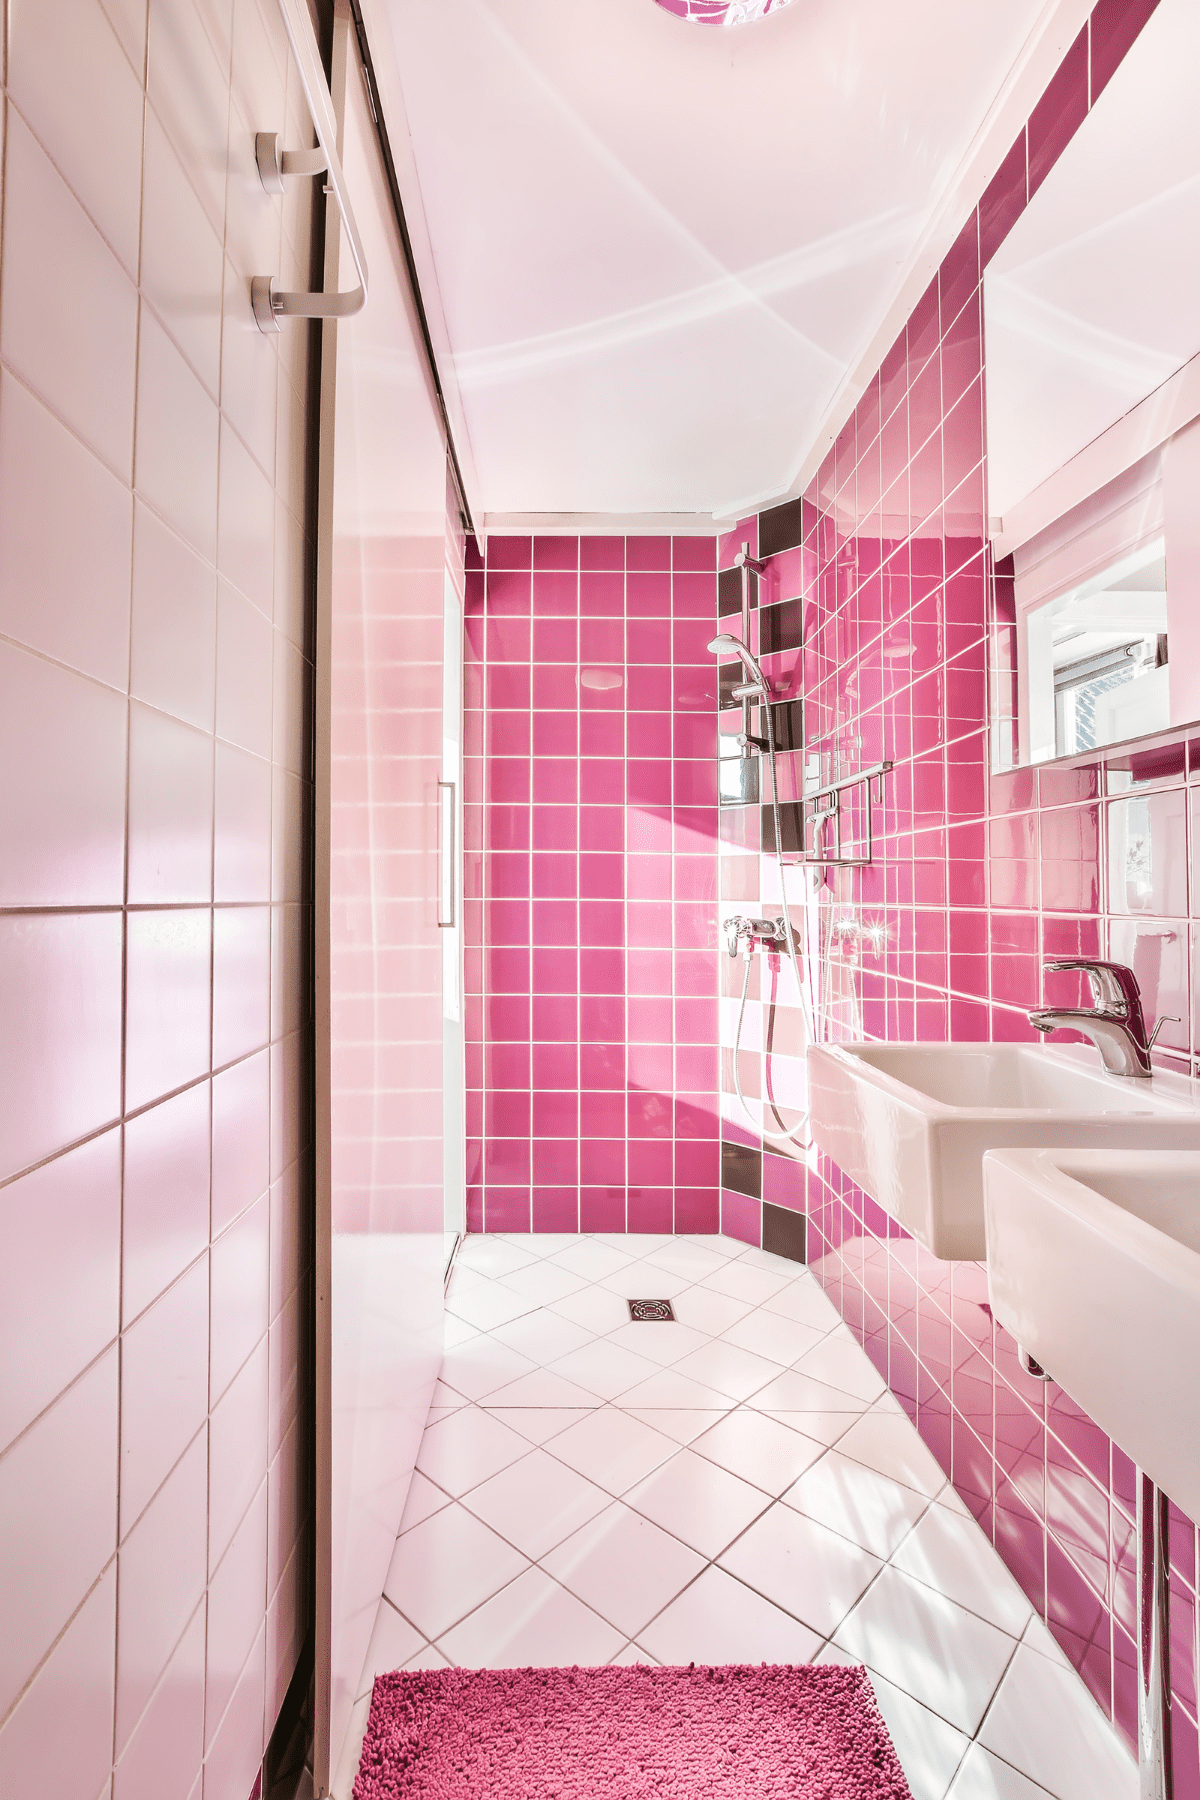 A picture of a white bathtub in a pink bathroom.